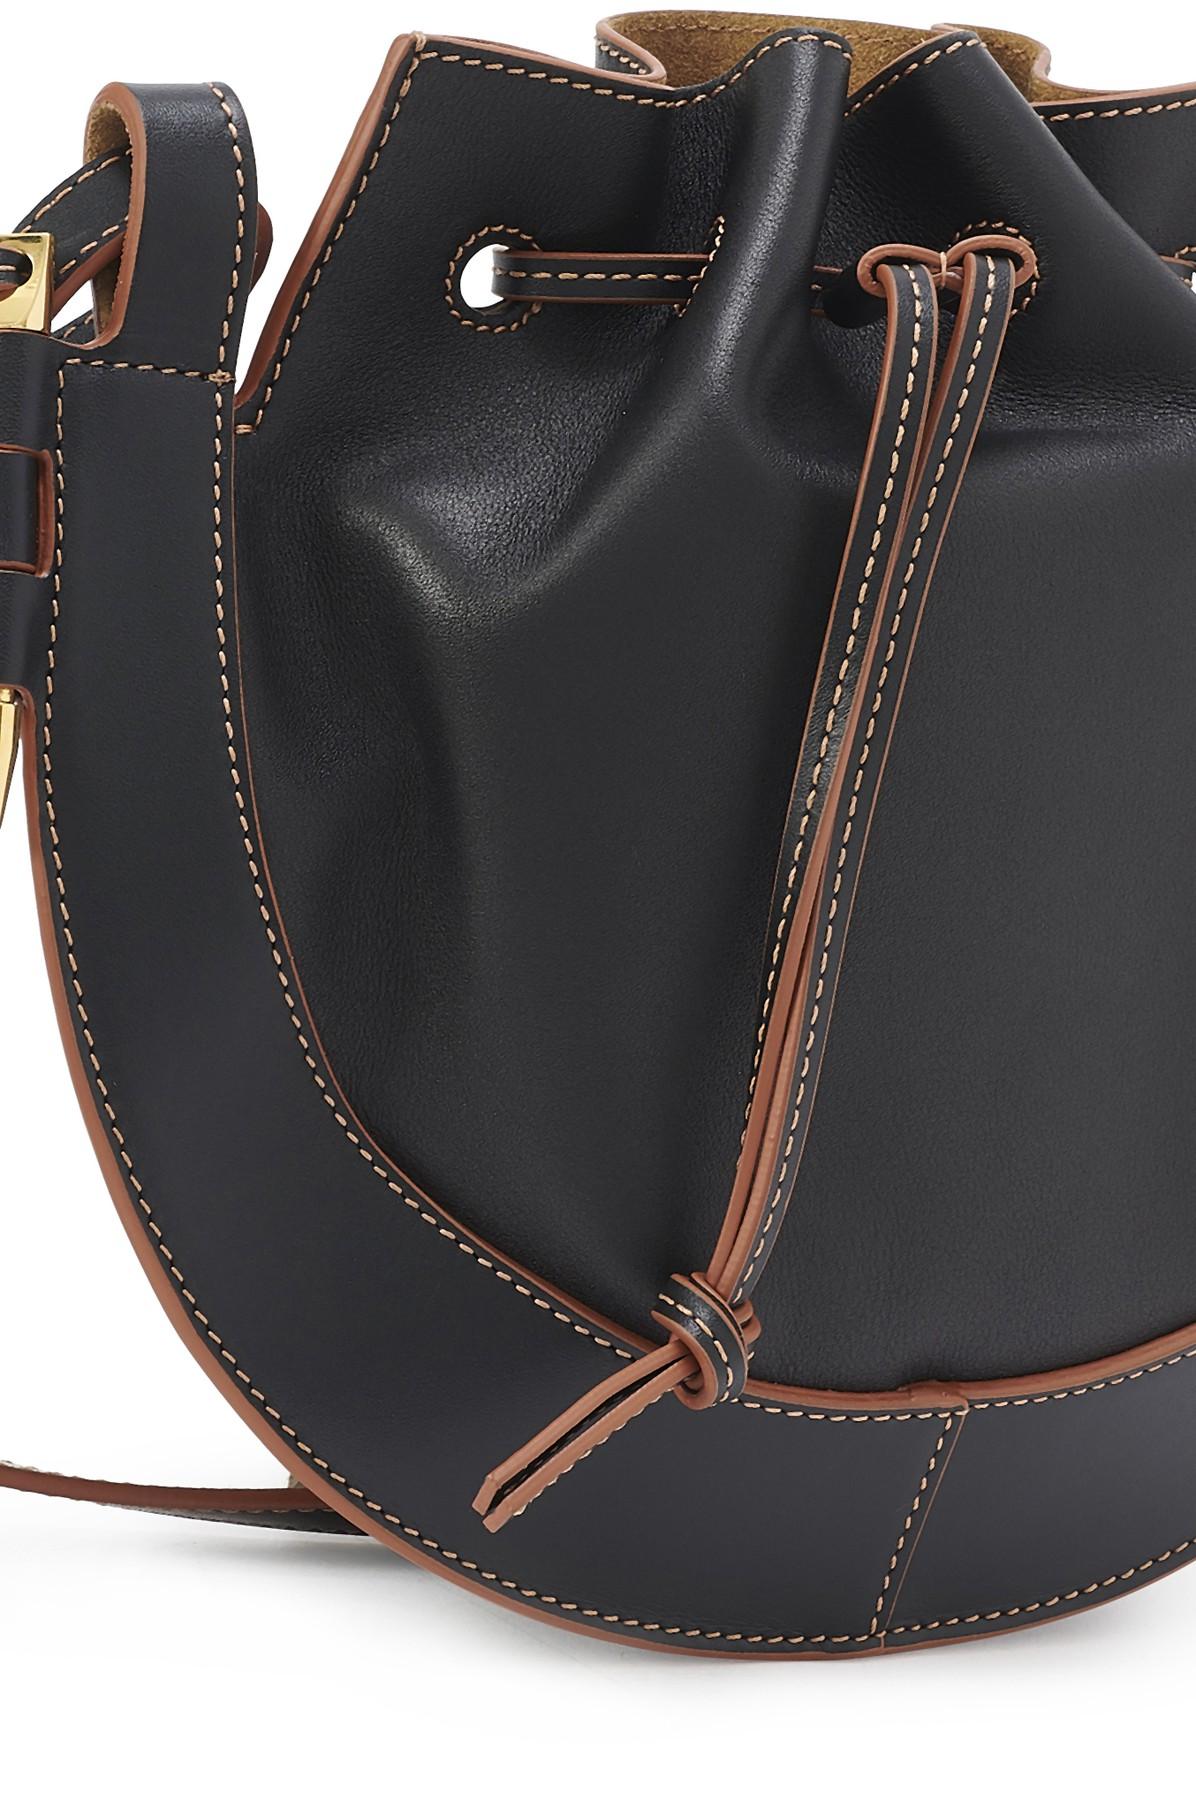 Loewe Small Horseshoe Colorblock Leather Saddle Bag In Narcissus